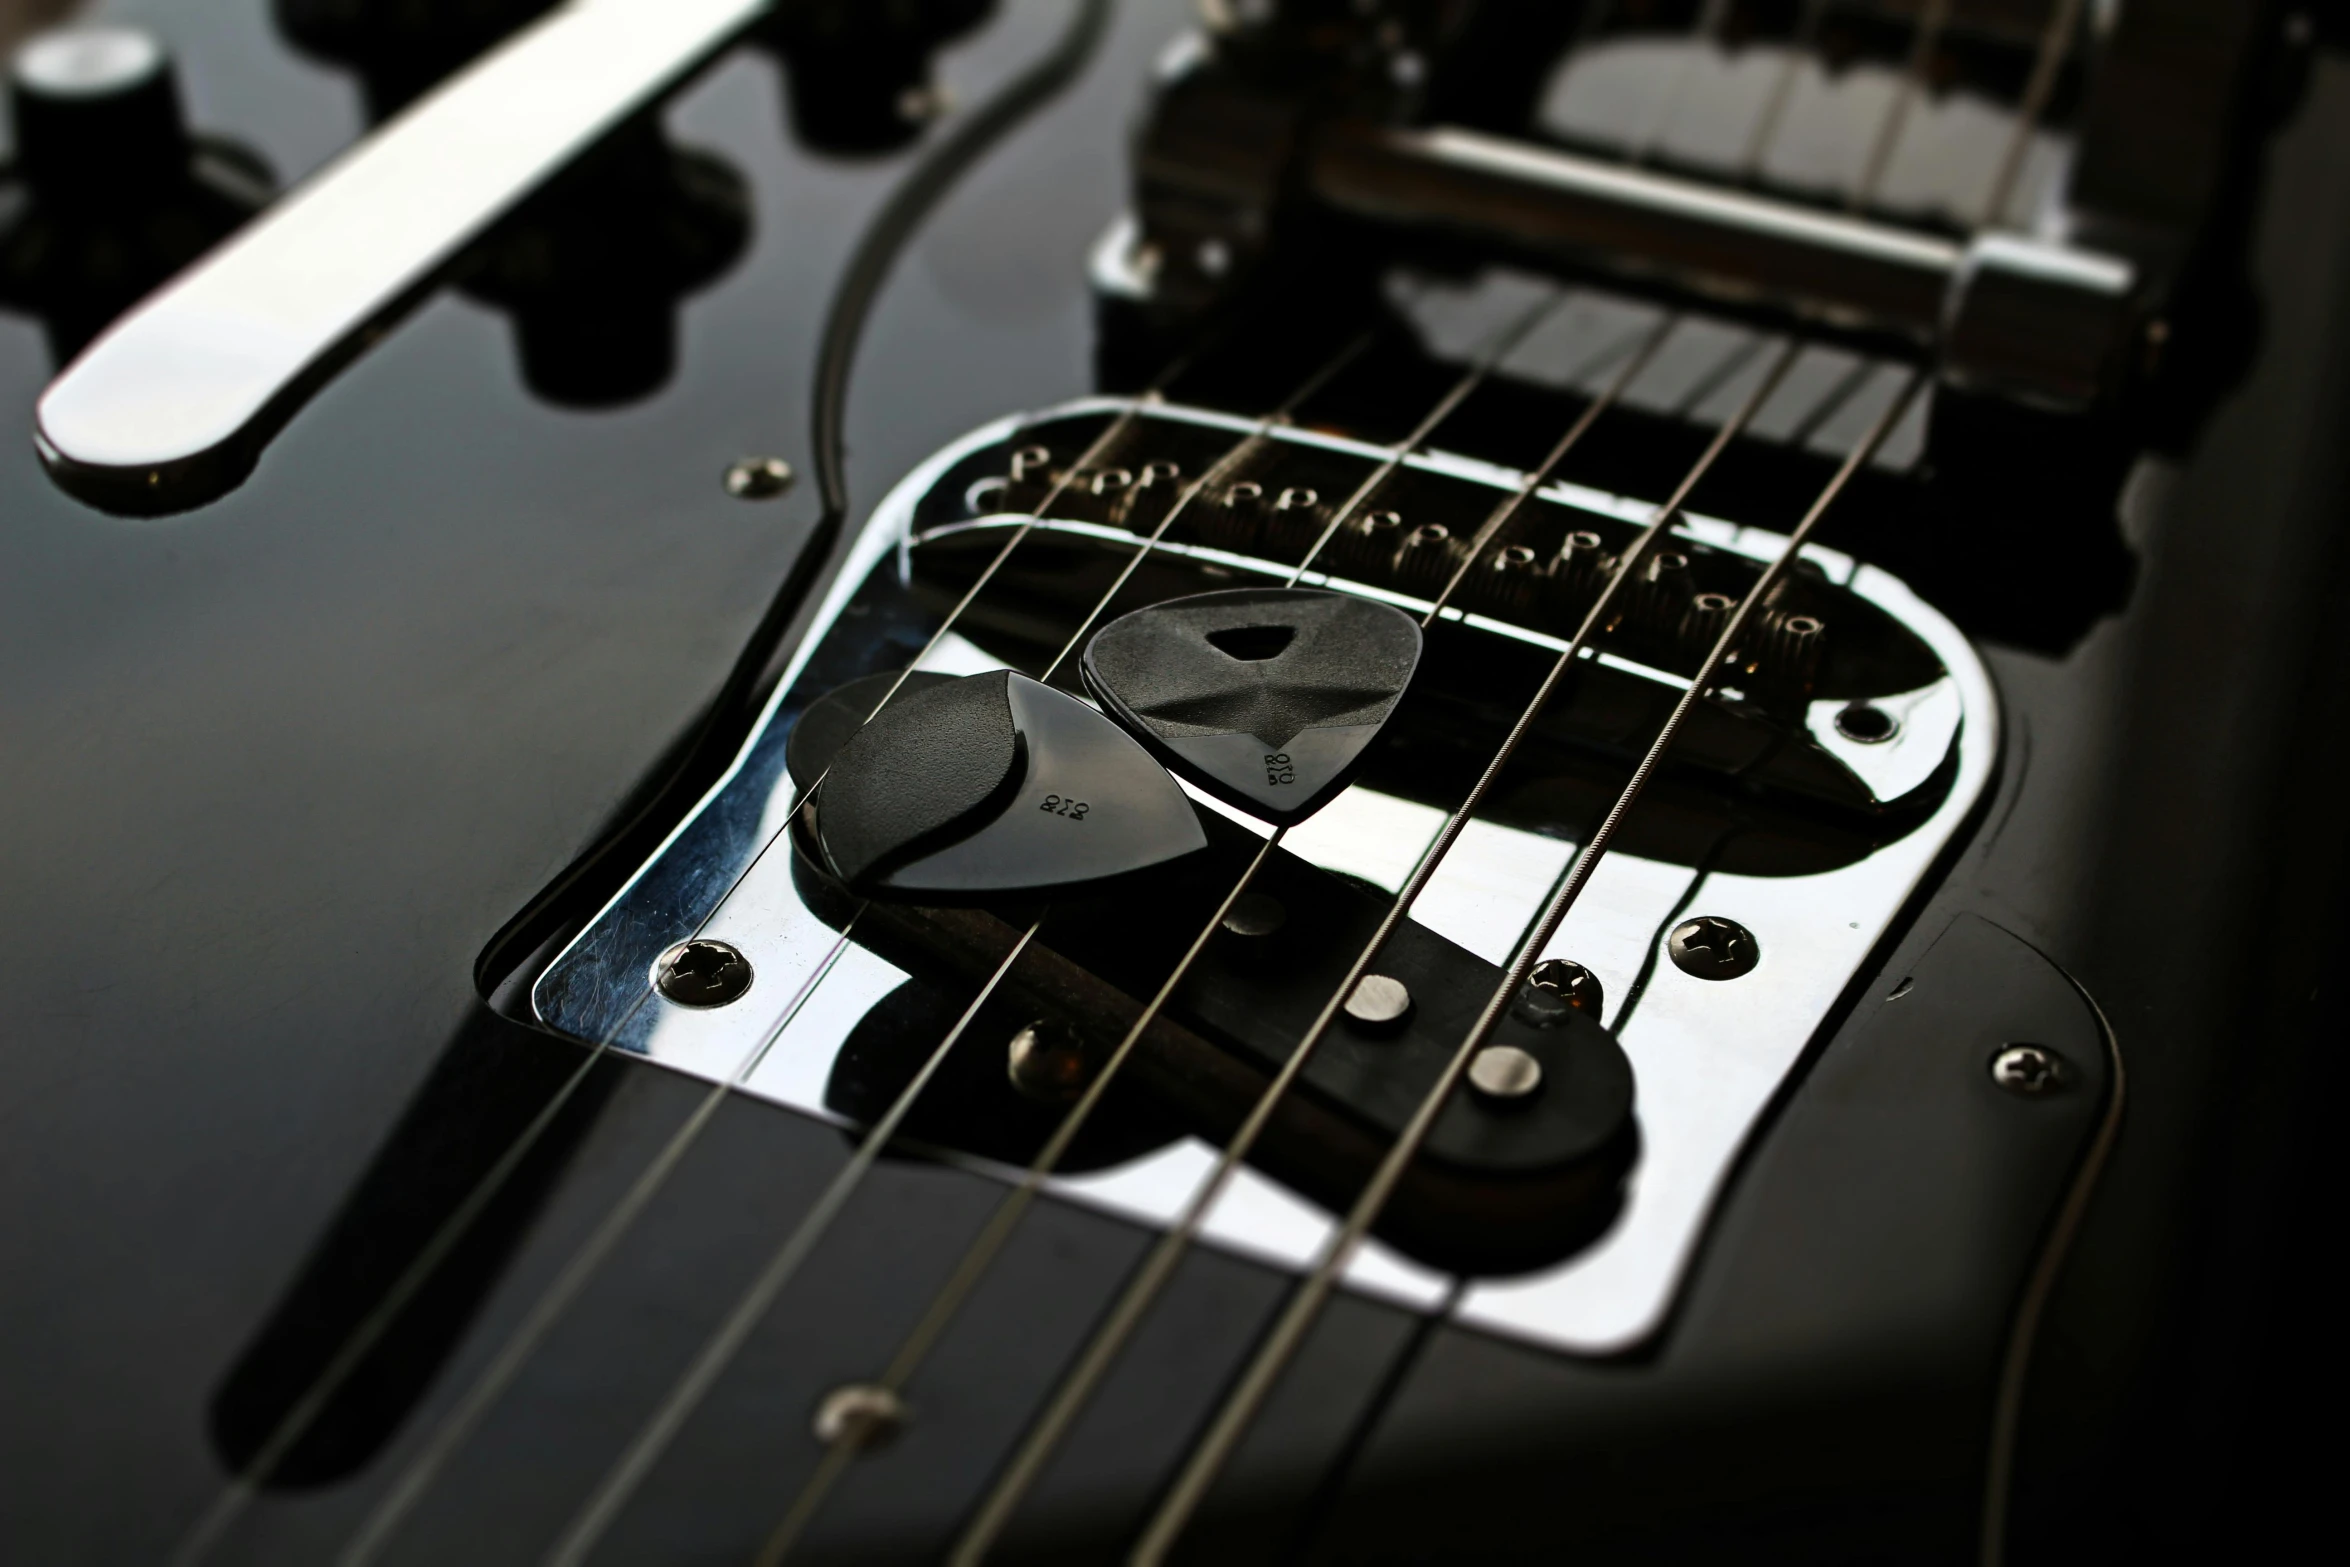 there is a close up po of a guitar